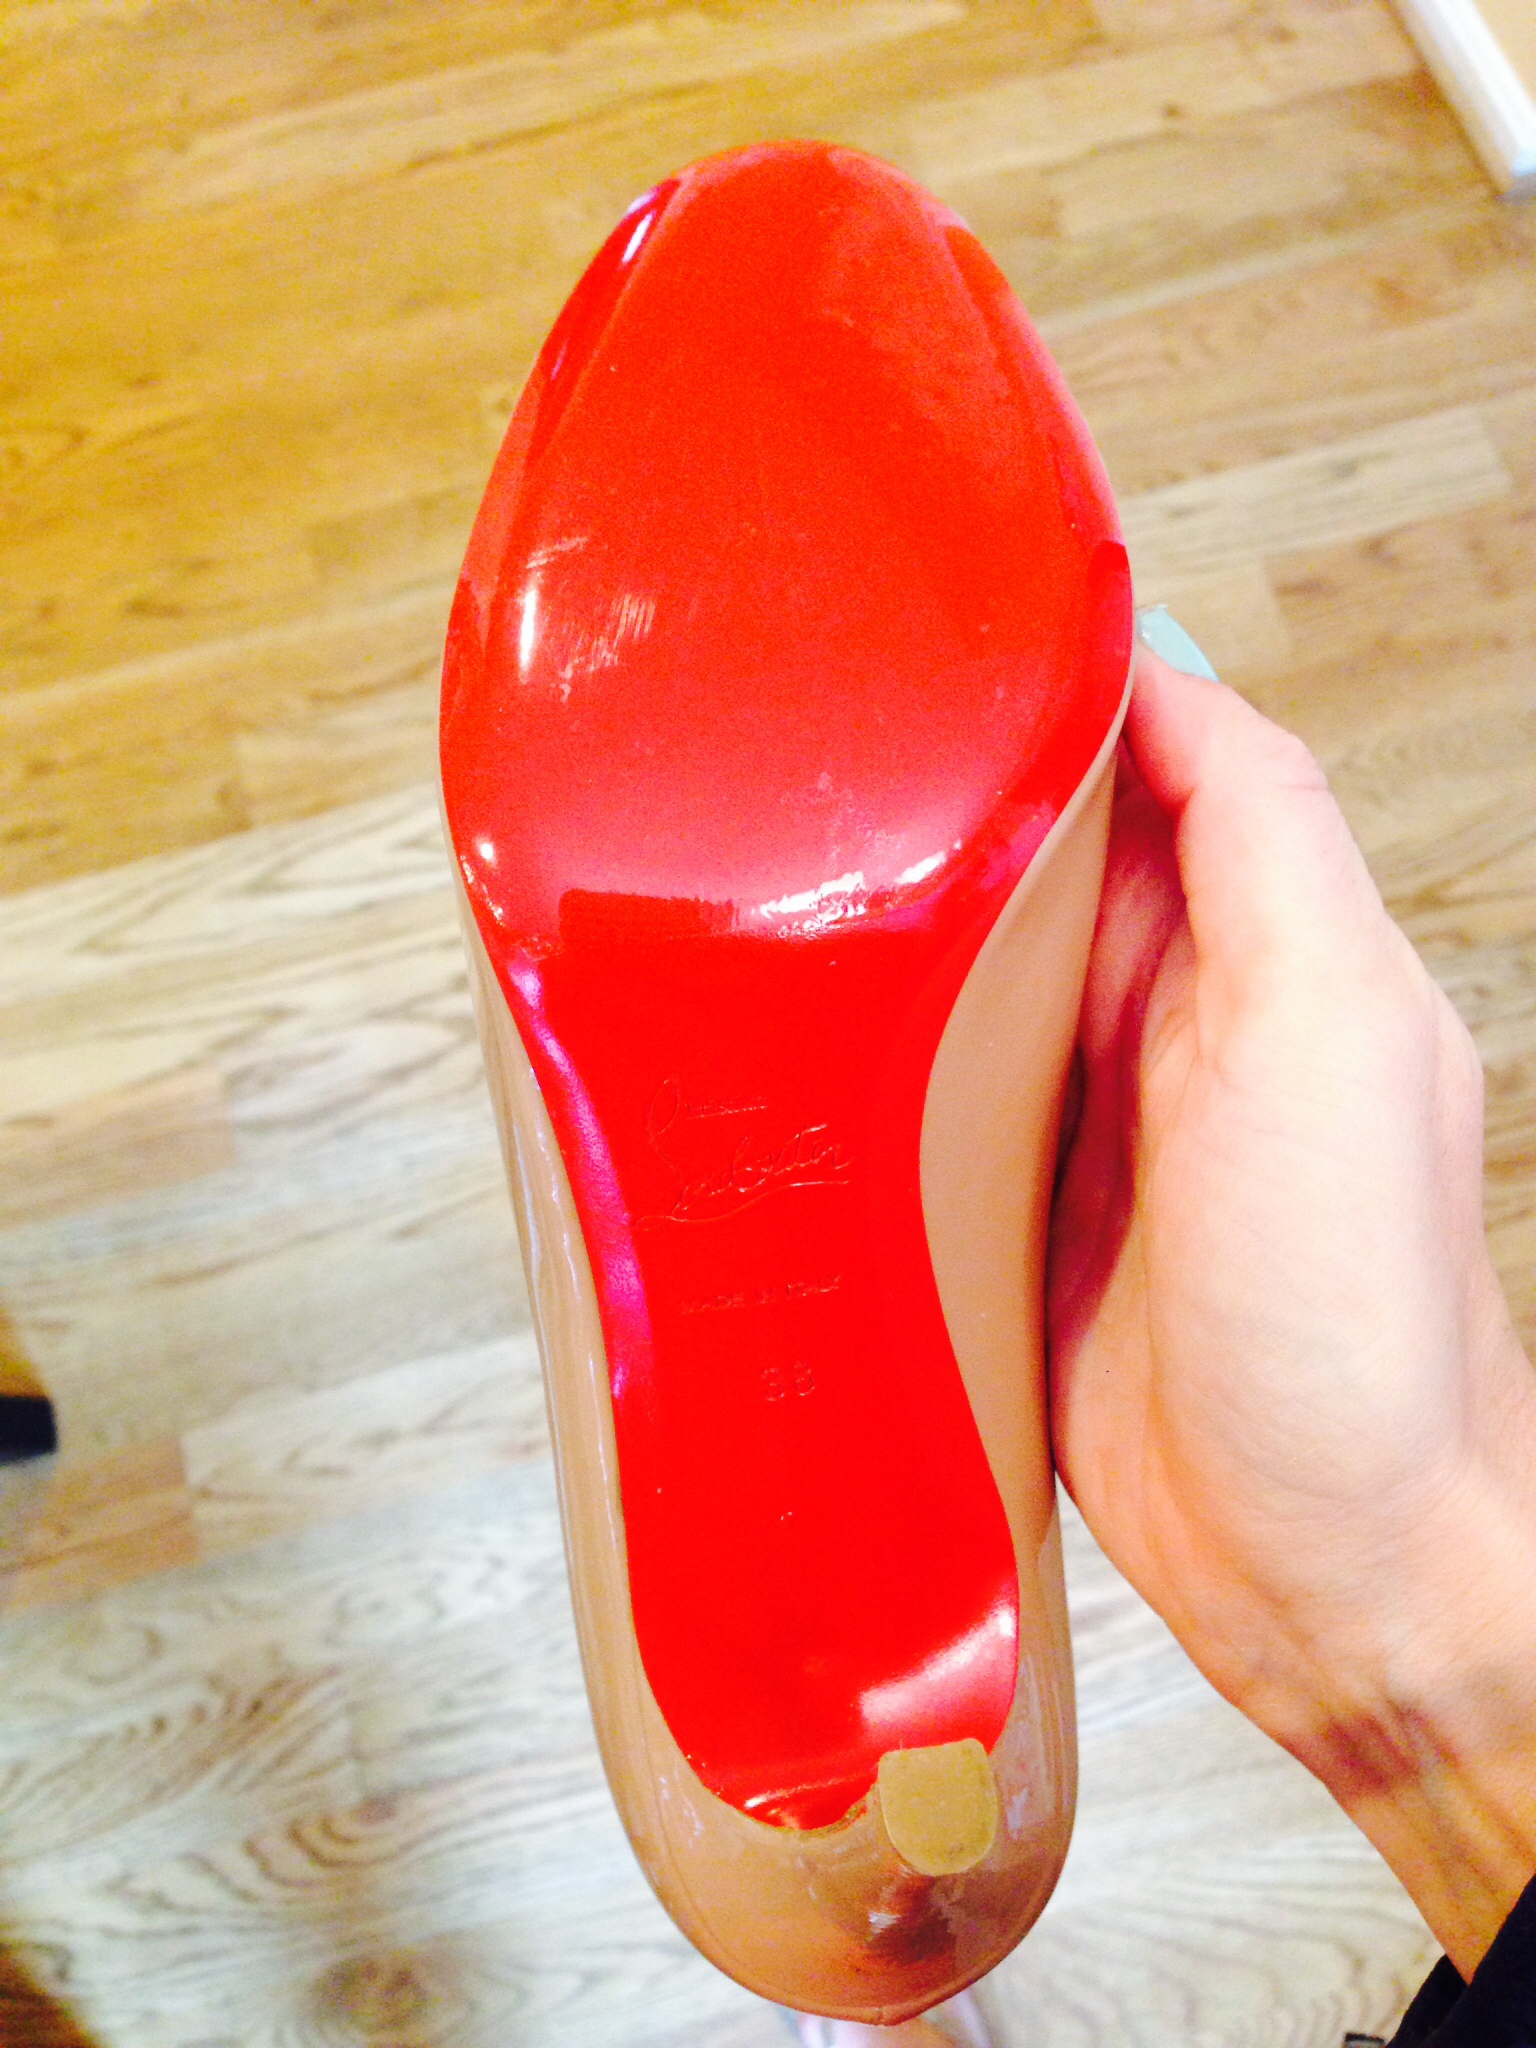 How to protect your Christian Louboutin shoes - Tanya Foster